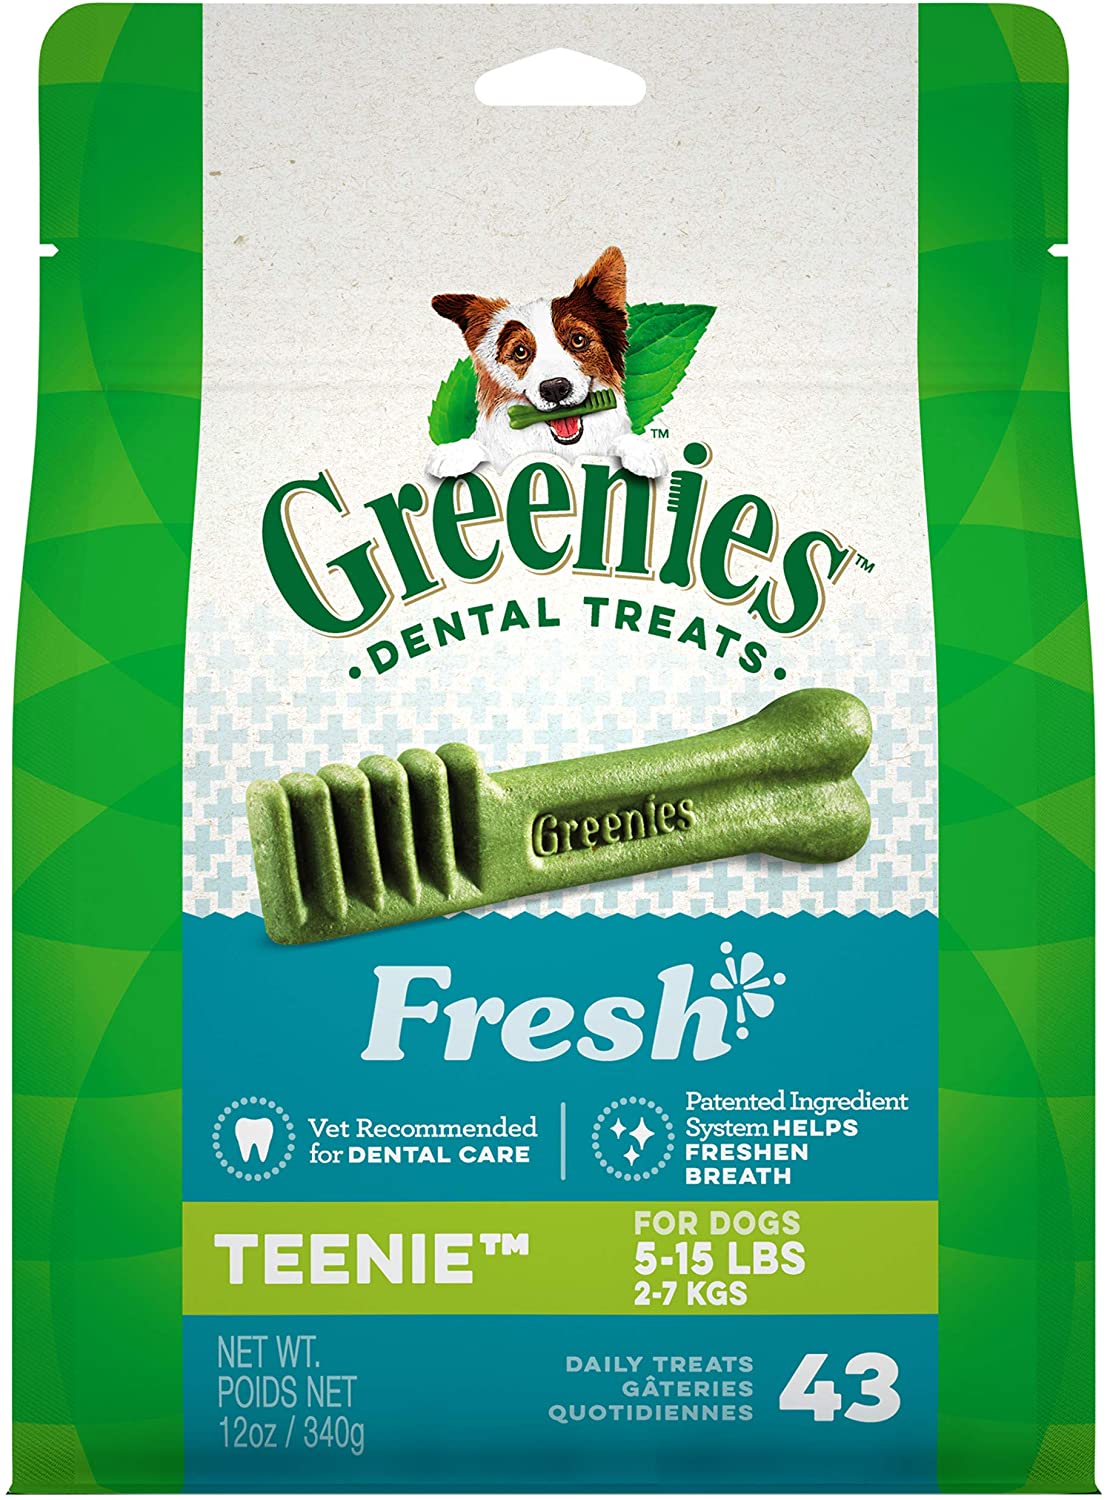 Amazon Coupon Save 5 Off First Purchase of Select Greenies Dental Treats